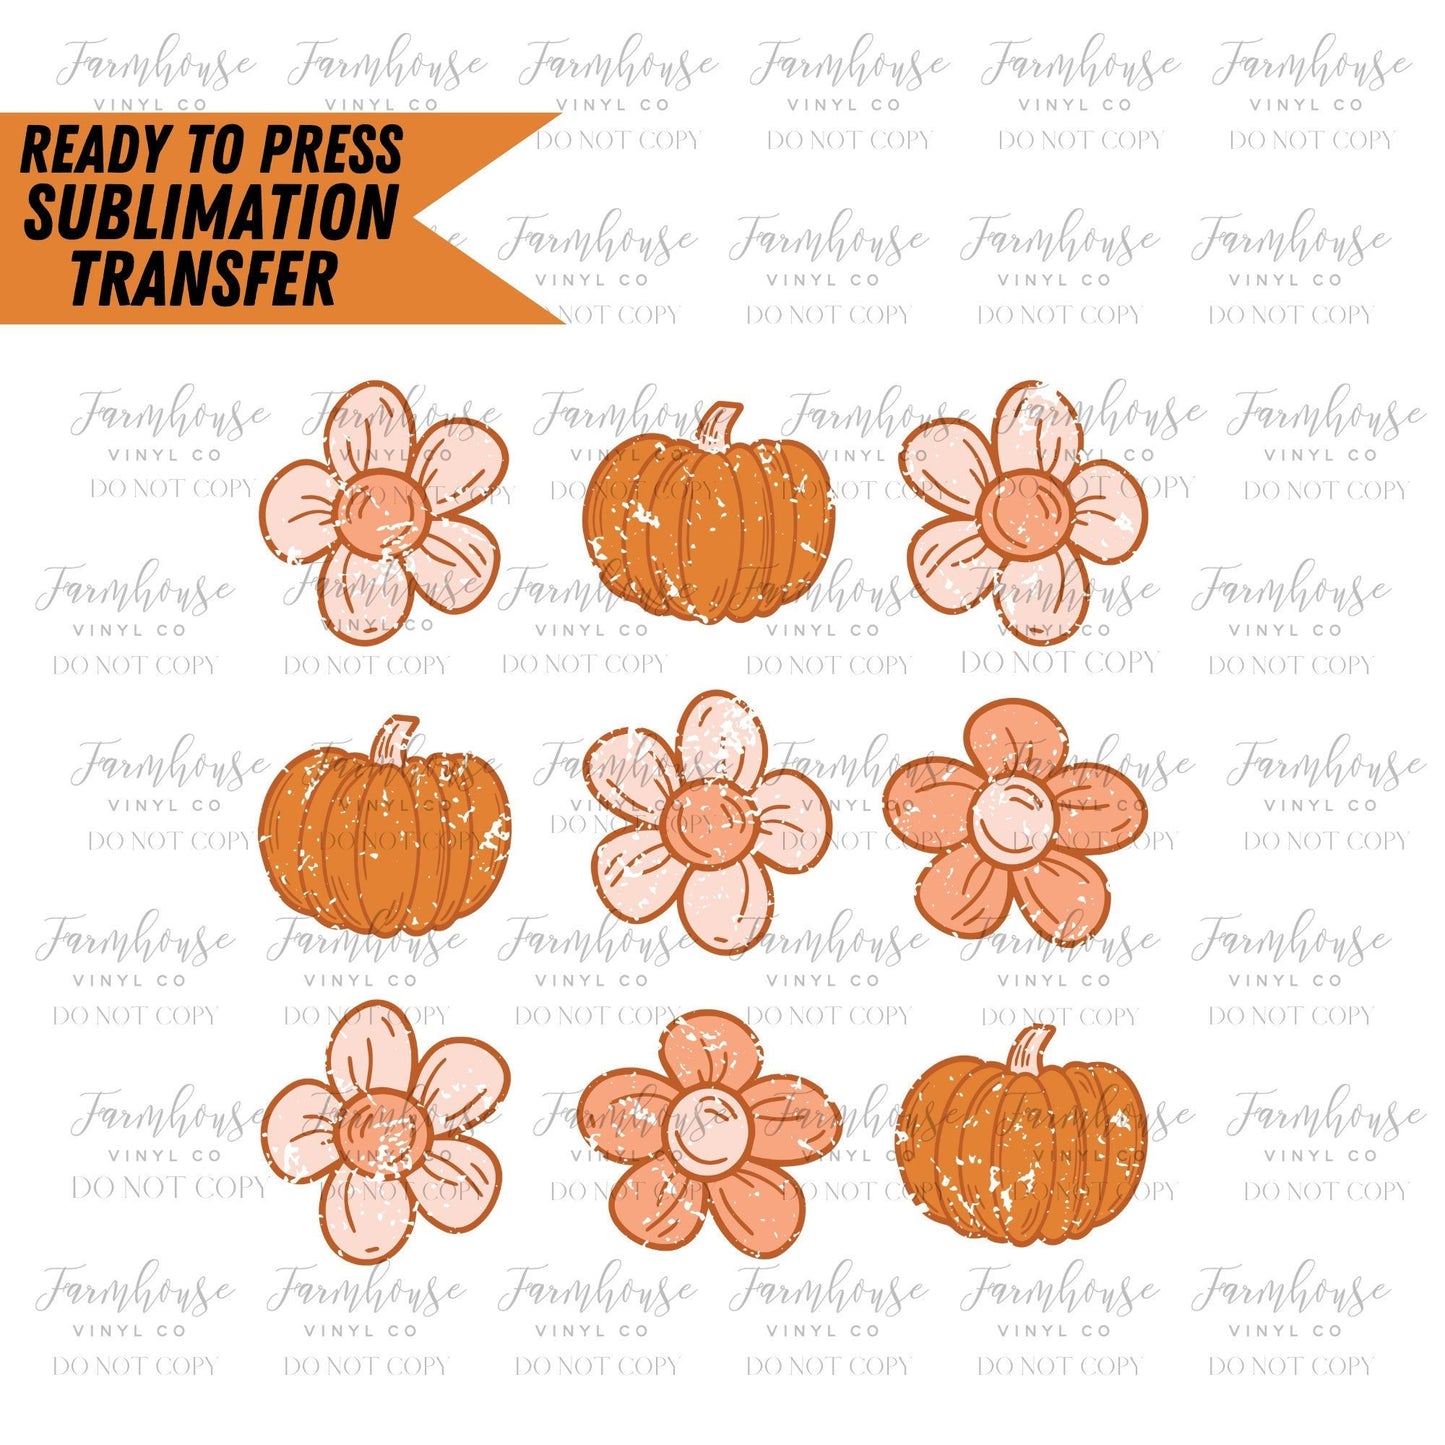 Floral Pumpkins Retro, Ready to Press Sublimation Transfers, Sublimation design, Trick or Treat, Halloween Retro Design, Vintage Fall Lover